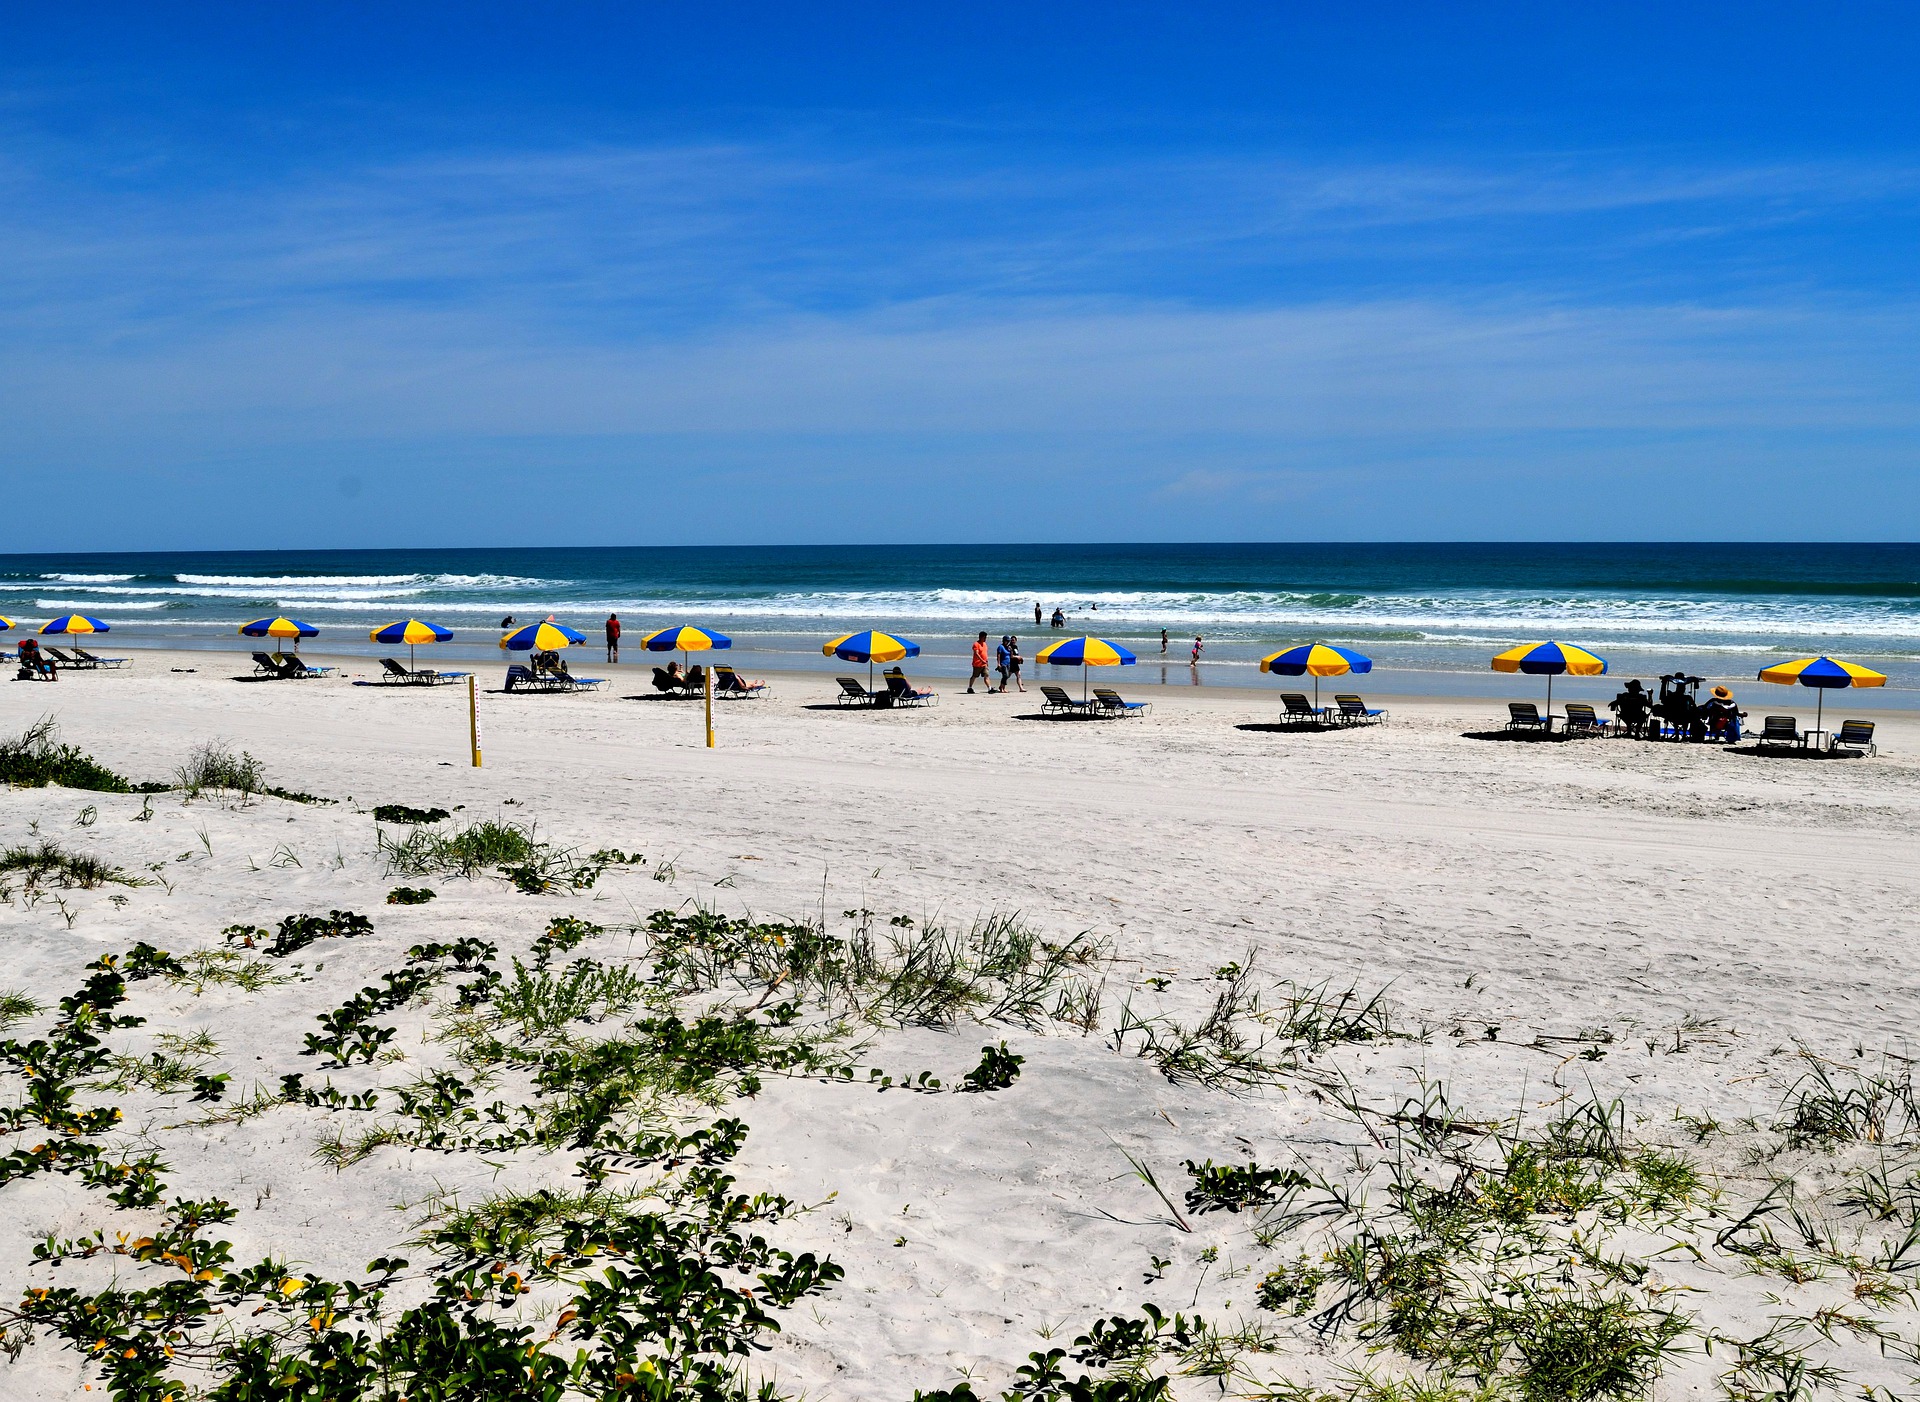 Daytona Beach in Florida. White sand with grasses extends to a blue sea, There are people seated under blue and yellow parasols on the beach and the sky is blue